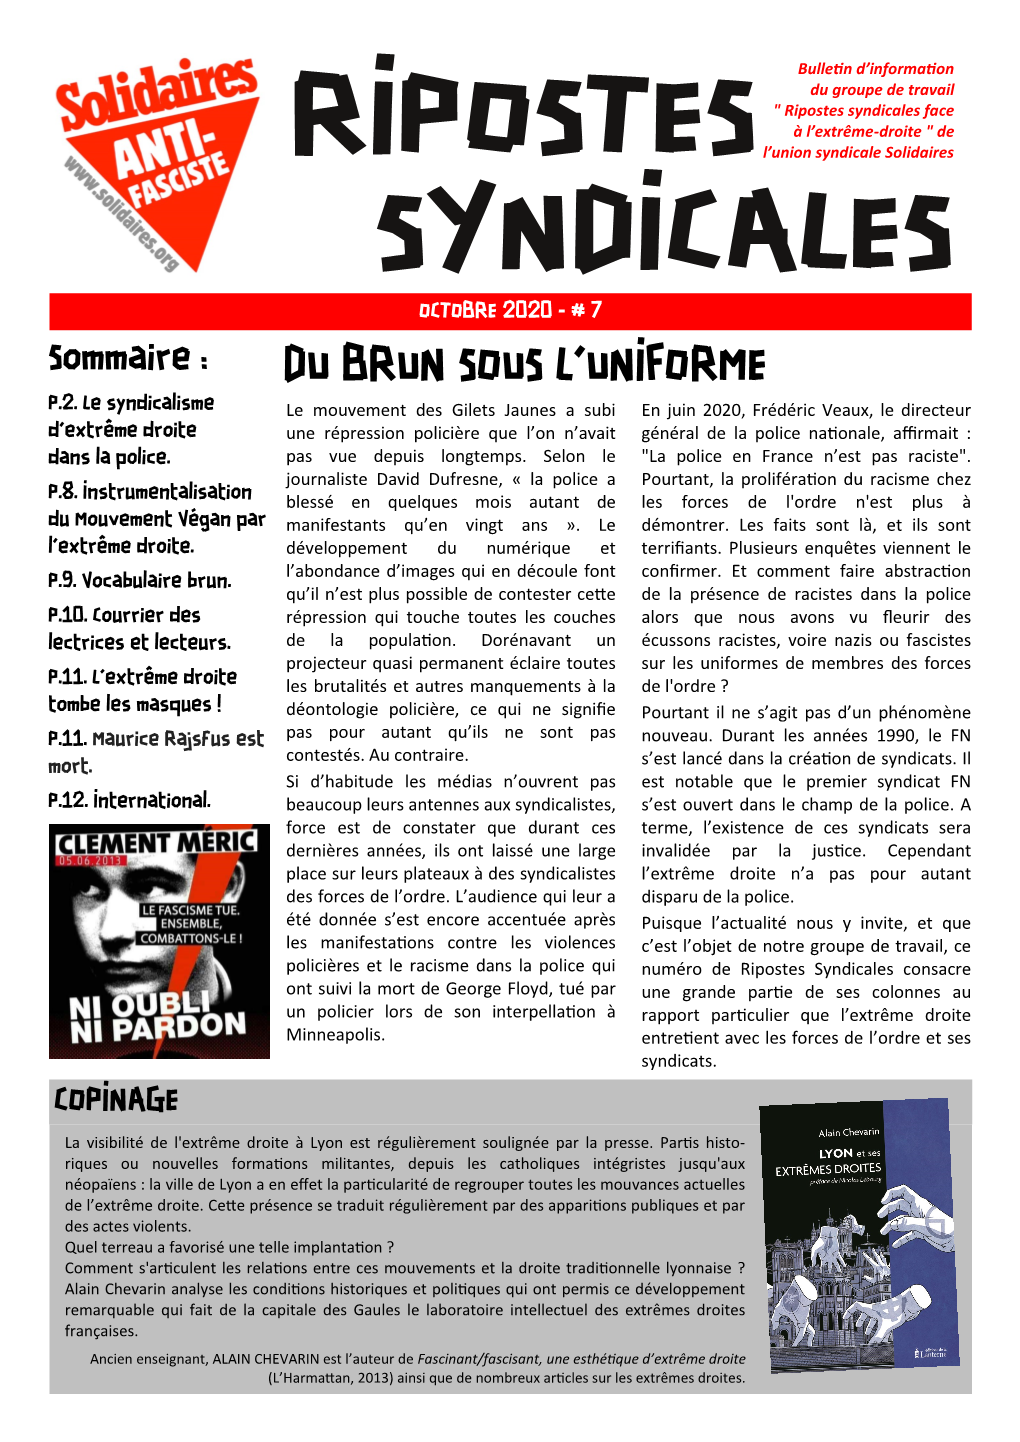 Syndicales Ripostes